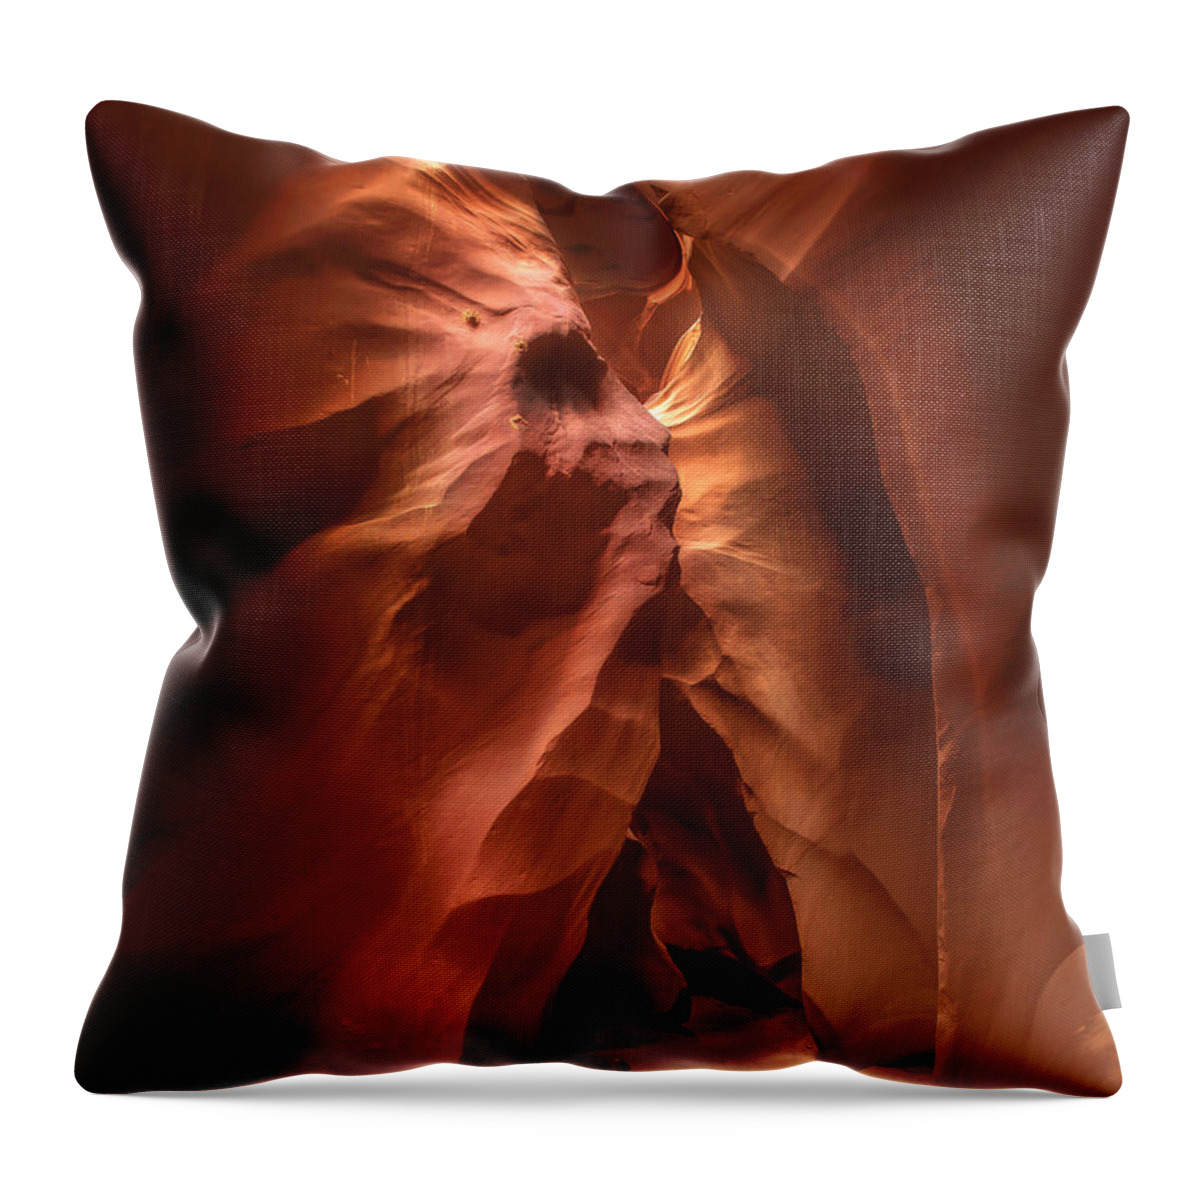 Arizona Throw Pillow featuring the photograph Navajo Canyon Chief by Marco Crupi